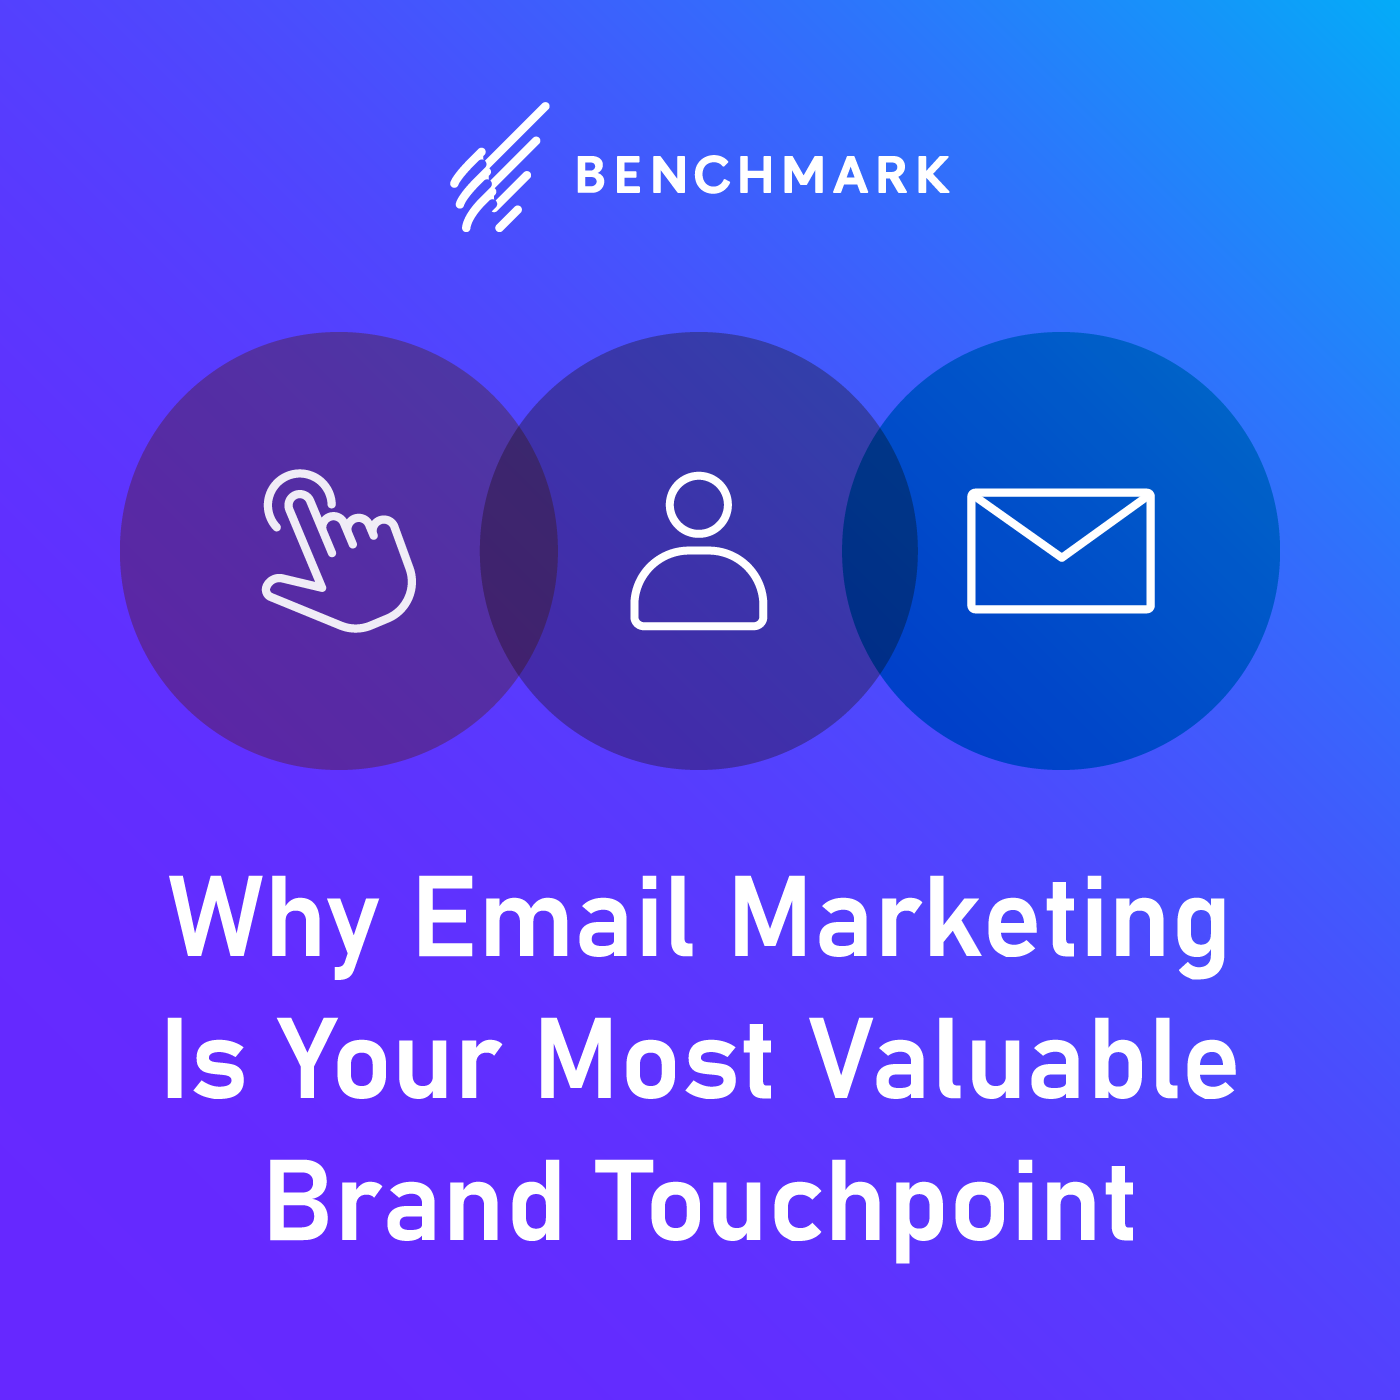 Why Email Marketing Is Your Most Valuable Brand Touchpoint